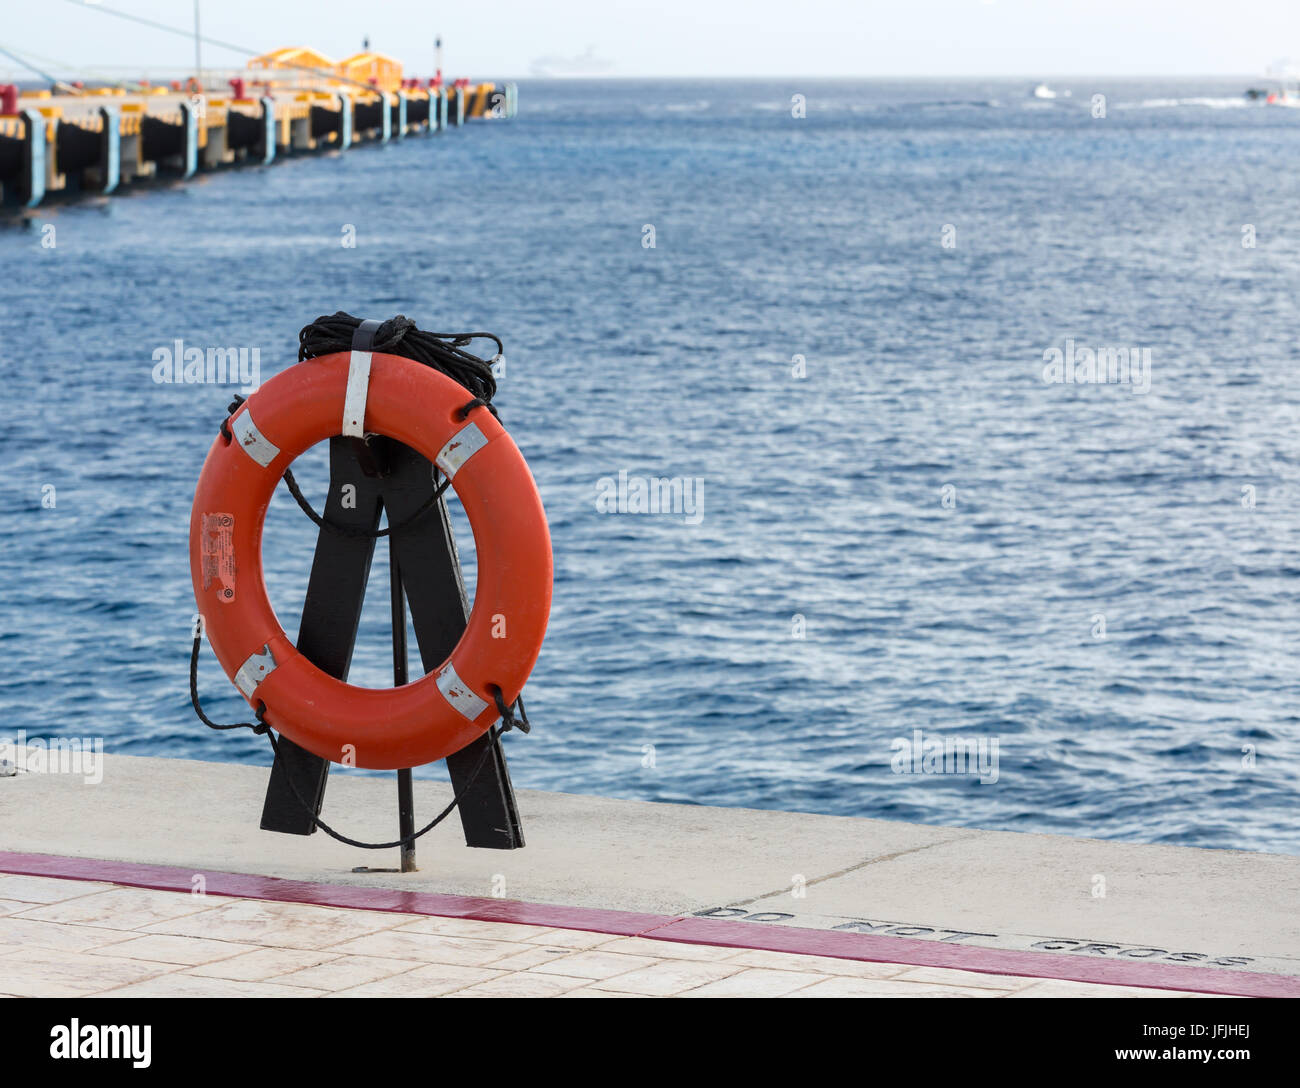 personal life ring on the dock seaside Stock Photo